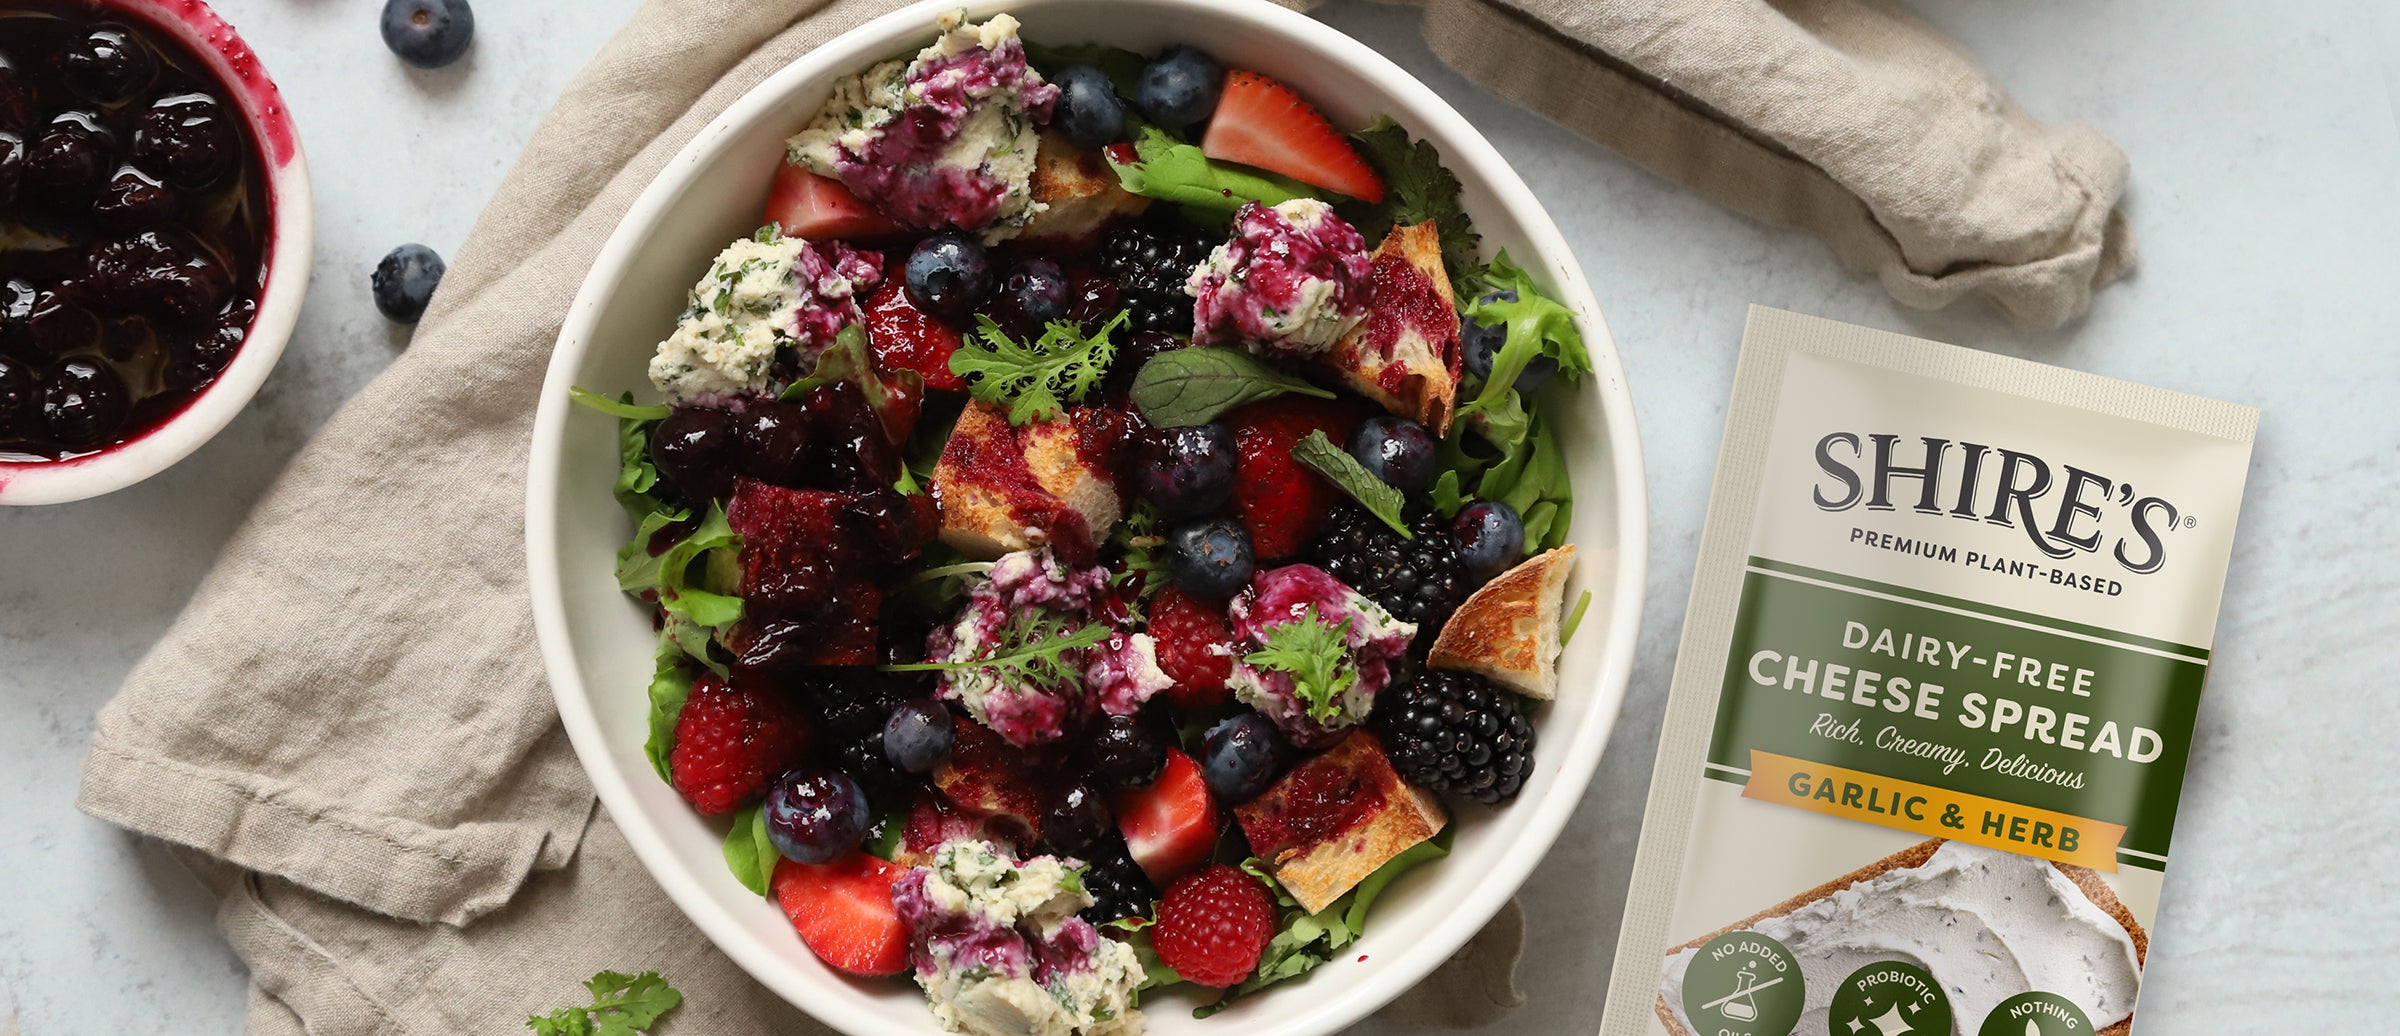 Field green salad with berries and Shire's Dairy-Free Cheese Spread